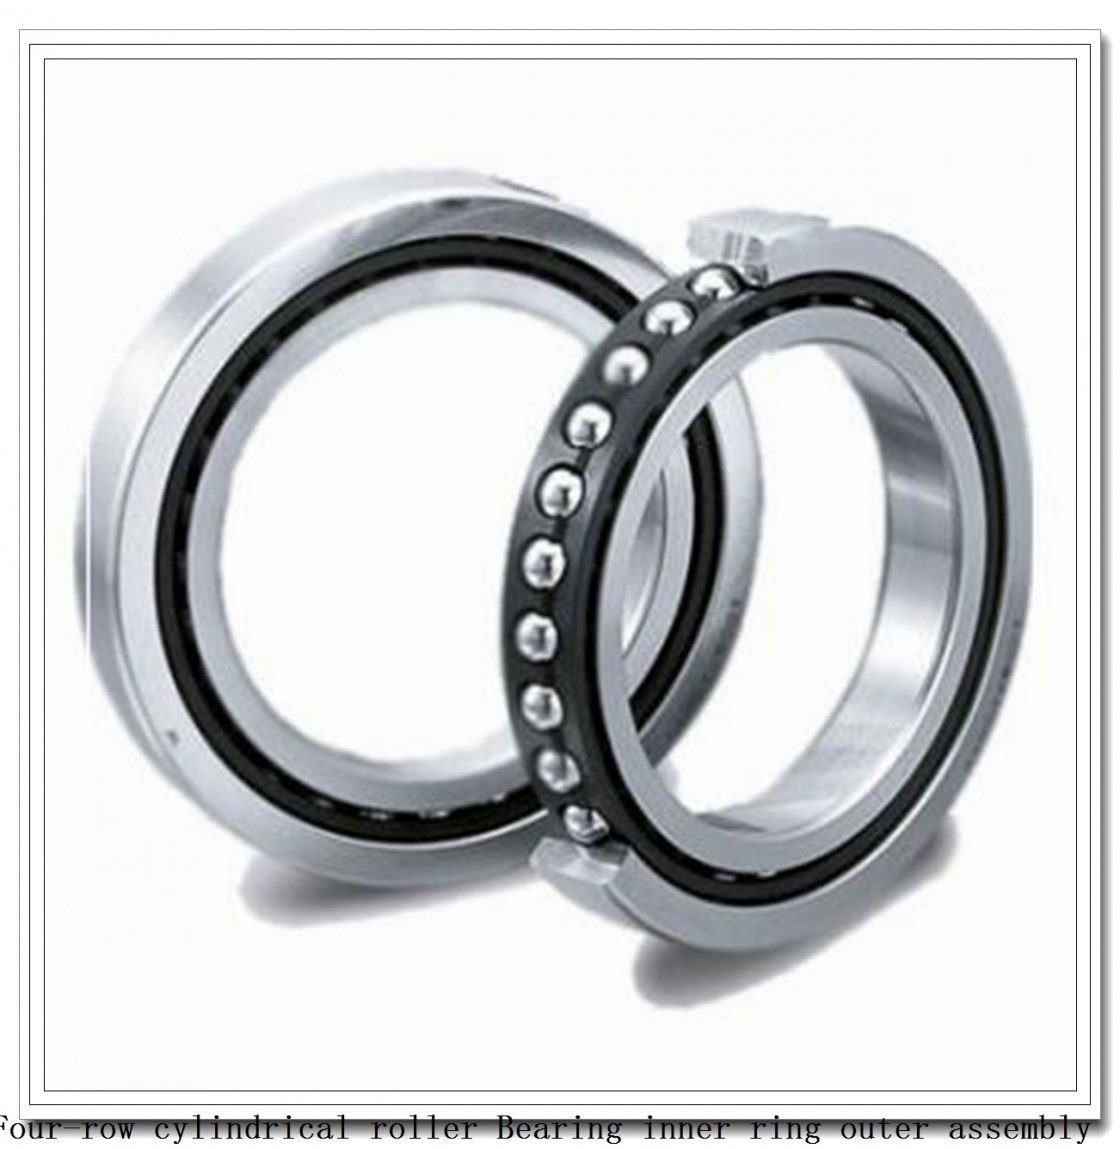 800arXs3165 878rXs3165 four-row cylindrical roller Bearing inner ring outer assembly